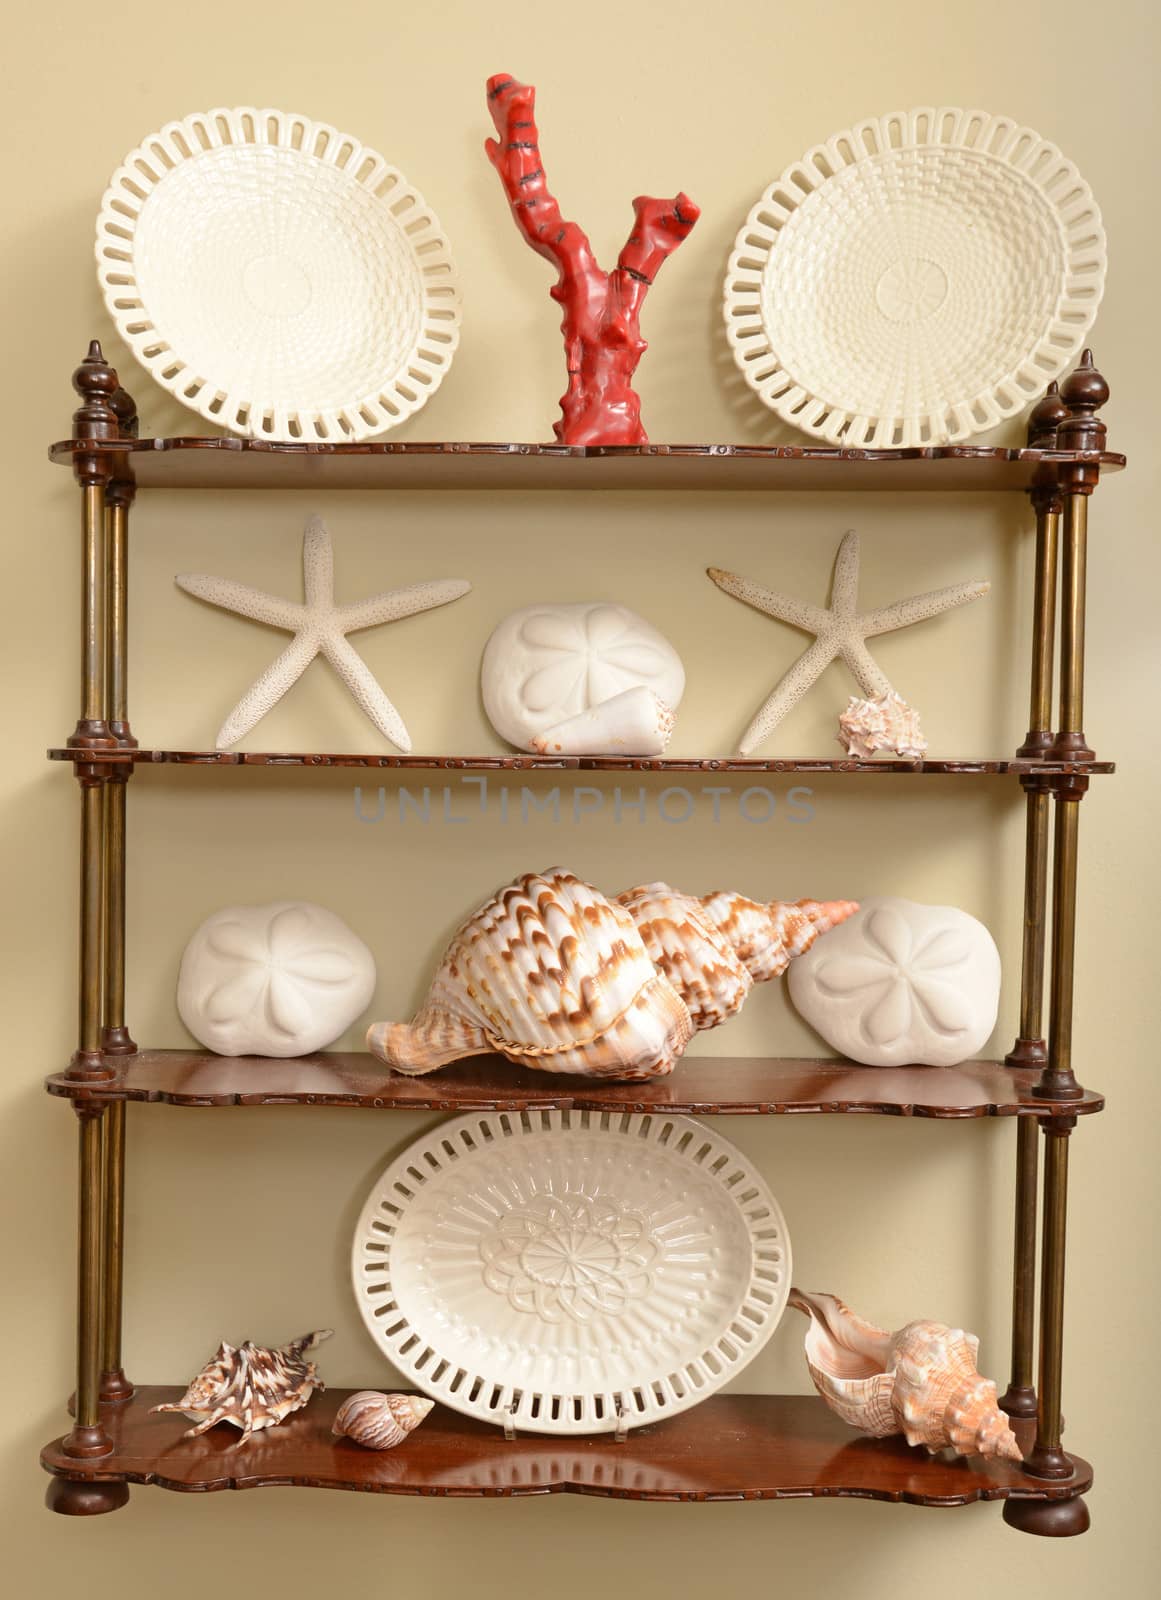 shells and other ocean theme decorations on a shelf for home decor